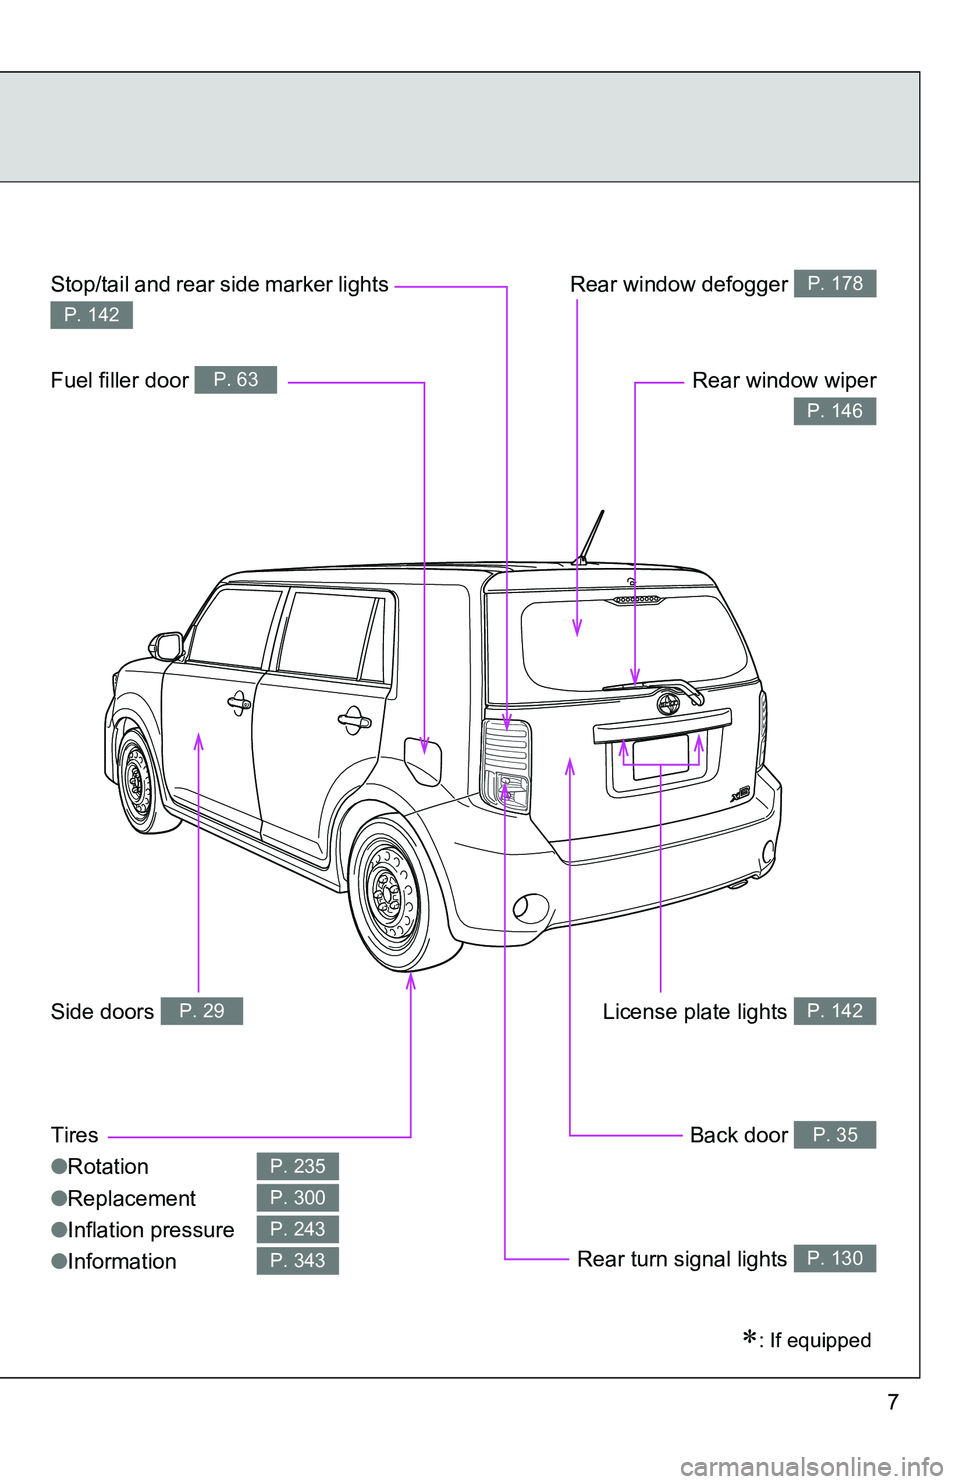 TOYOTA xB 2011  Owners Manual (in English) 7
Rear window defogger P. 178
Rear window wiper
P. 146
License plate lights P. 142
Back door P. 35
Rear turn signal lights P. 130
Stop/tail and rear side marker lights 
P. 142
Fuel filler door P. 63
S